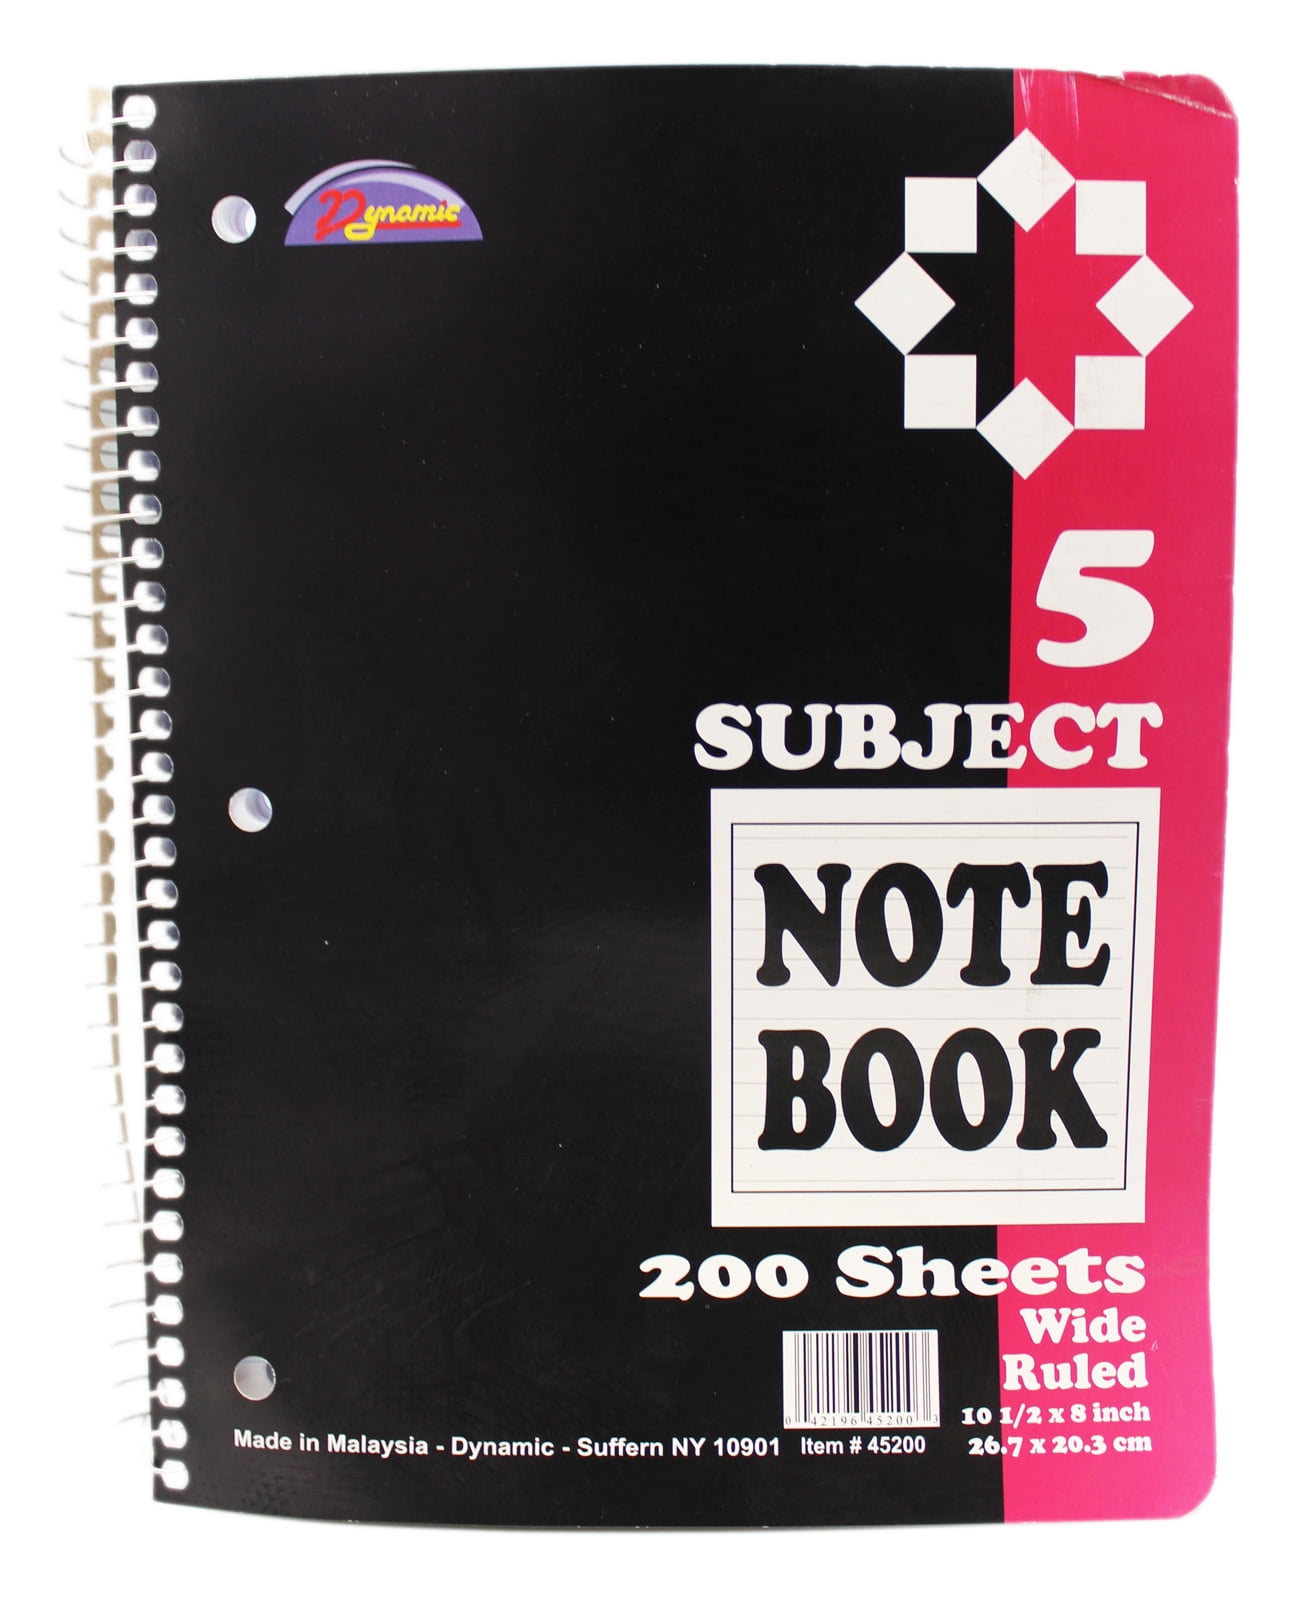 Black Purple Set Includes: Red Random 4 Pack Emraw 5 Subject Notebook Spiral with 180 Sheets of Wide Ruled White Paper Blue Covers 